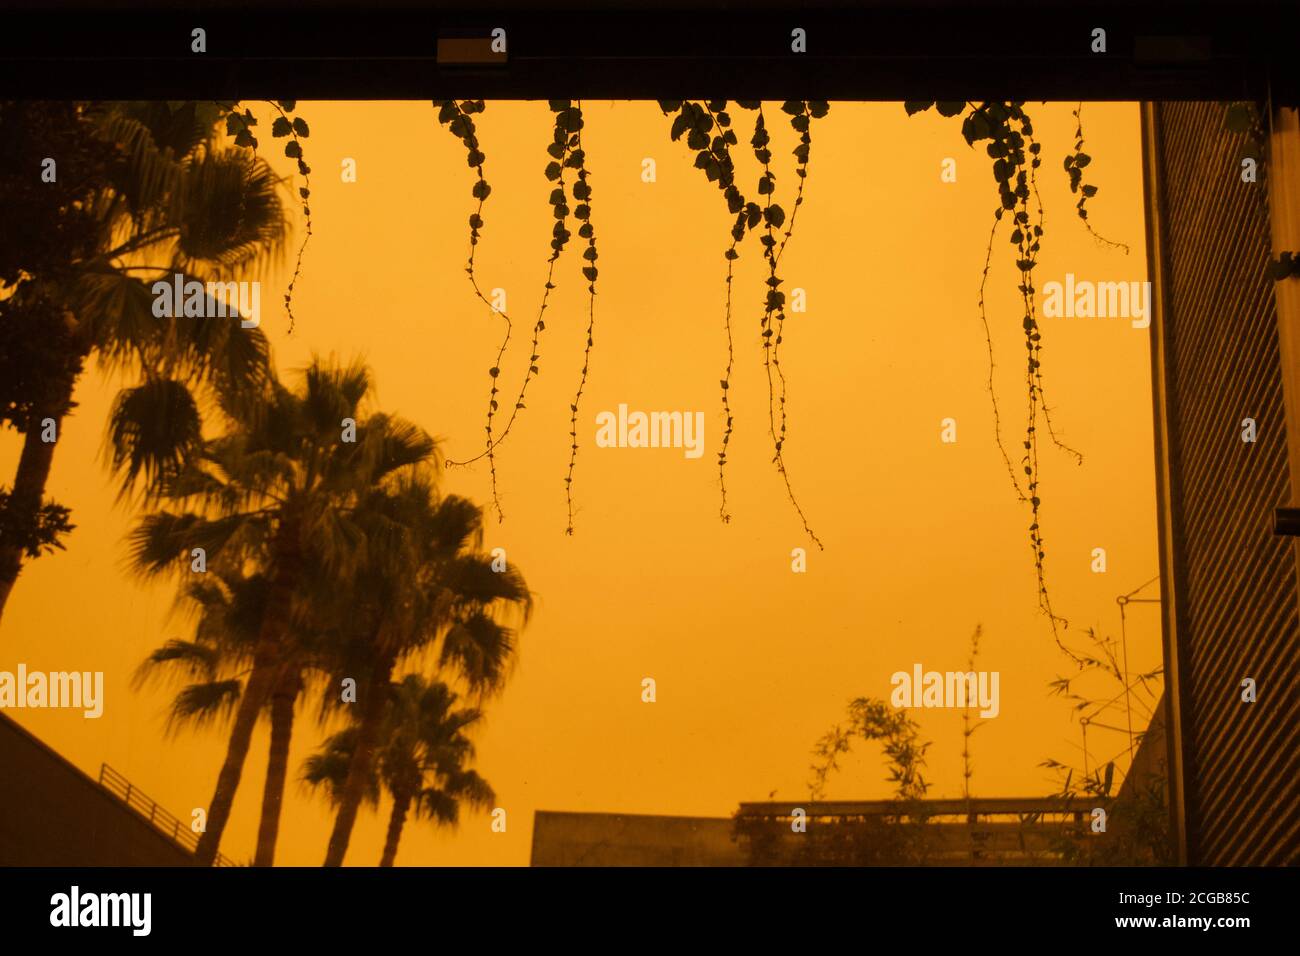 September 9, 2020. Freak afternoon orange sky from toxic smoke of wildfires from Oregon and California wildfires behind palm trees in courtyard. Stock Photo